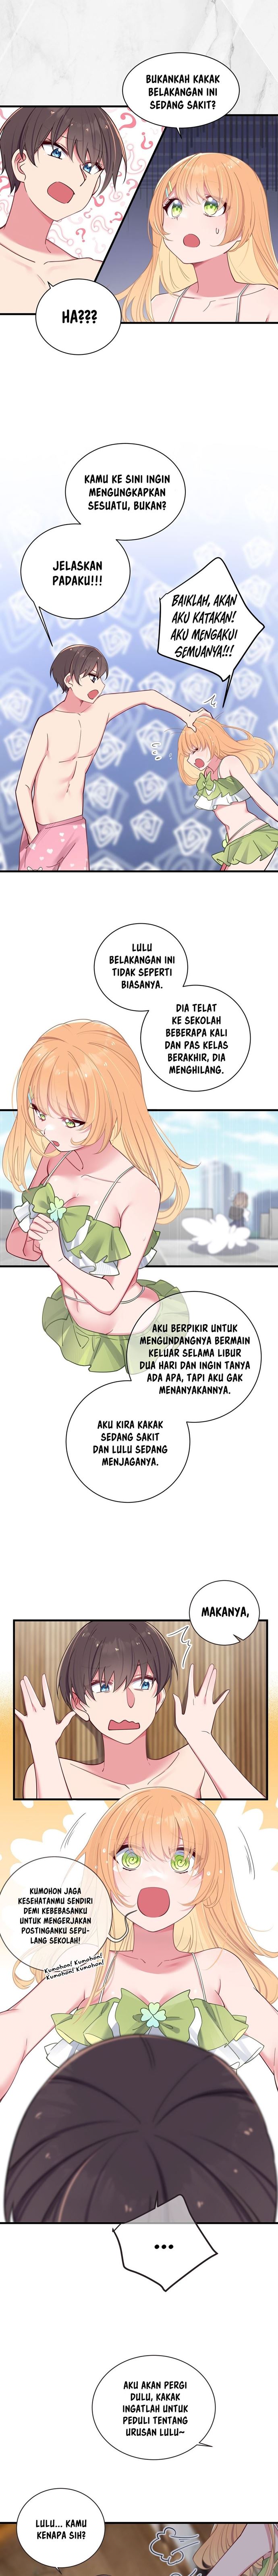 My Fake Girlfriends are using me as a Shield Chapter 31 Bahasa Indonesia